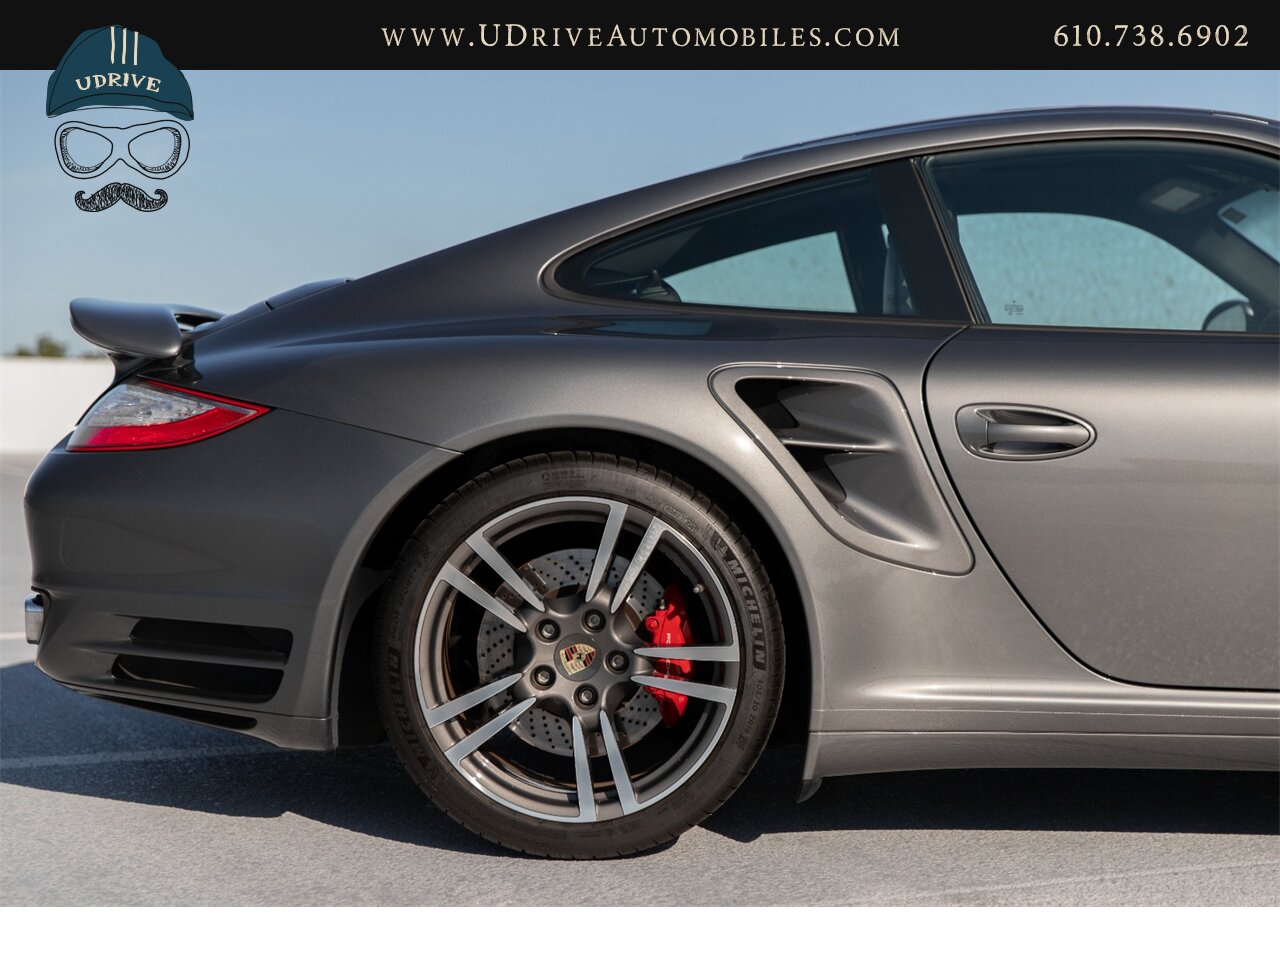 2012 Porsche 911 Turbo 6 Speed Manual 1 Owner 15k Miles PTV  Adaptive Sport Seats Sport Shifter 997.2 Extremely Rare - Photo 18 - West Chester, PA 19382